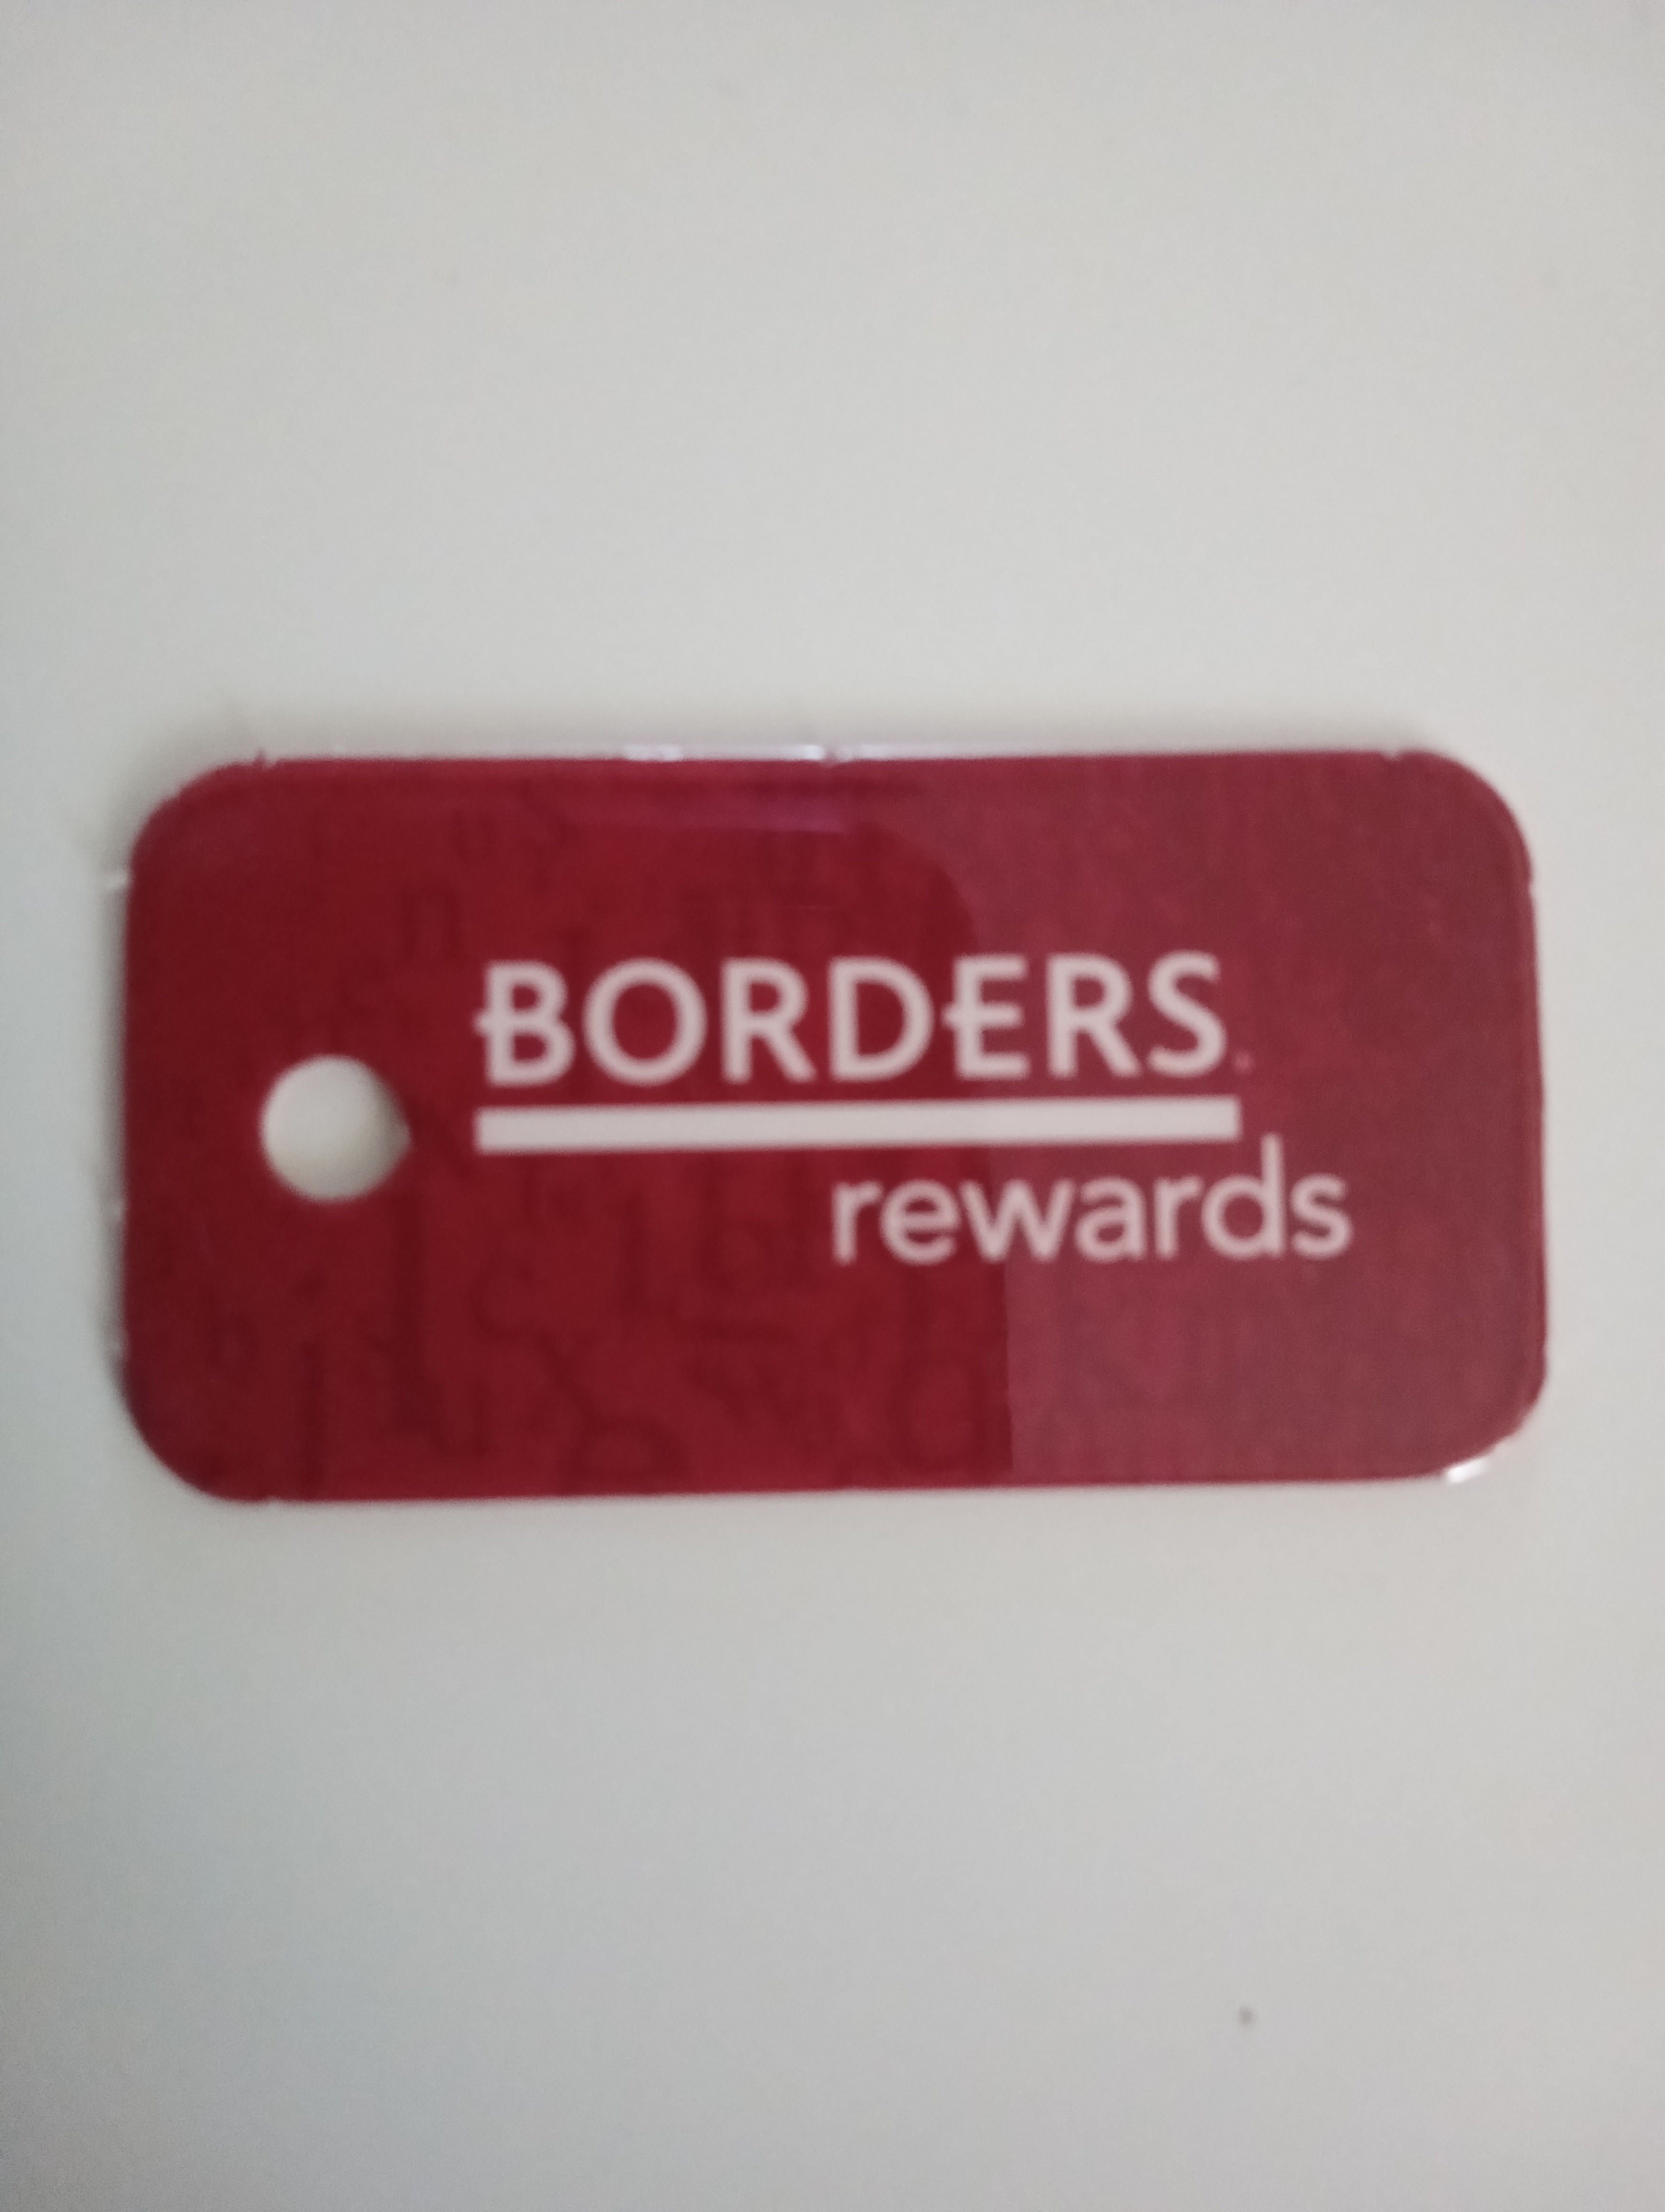 An image of a Borders member card